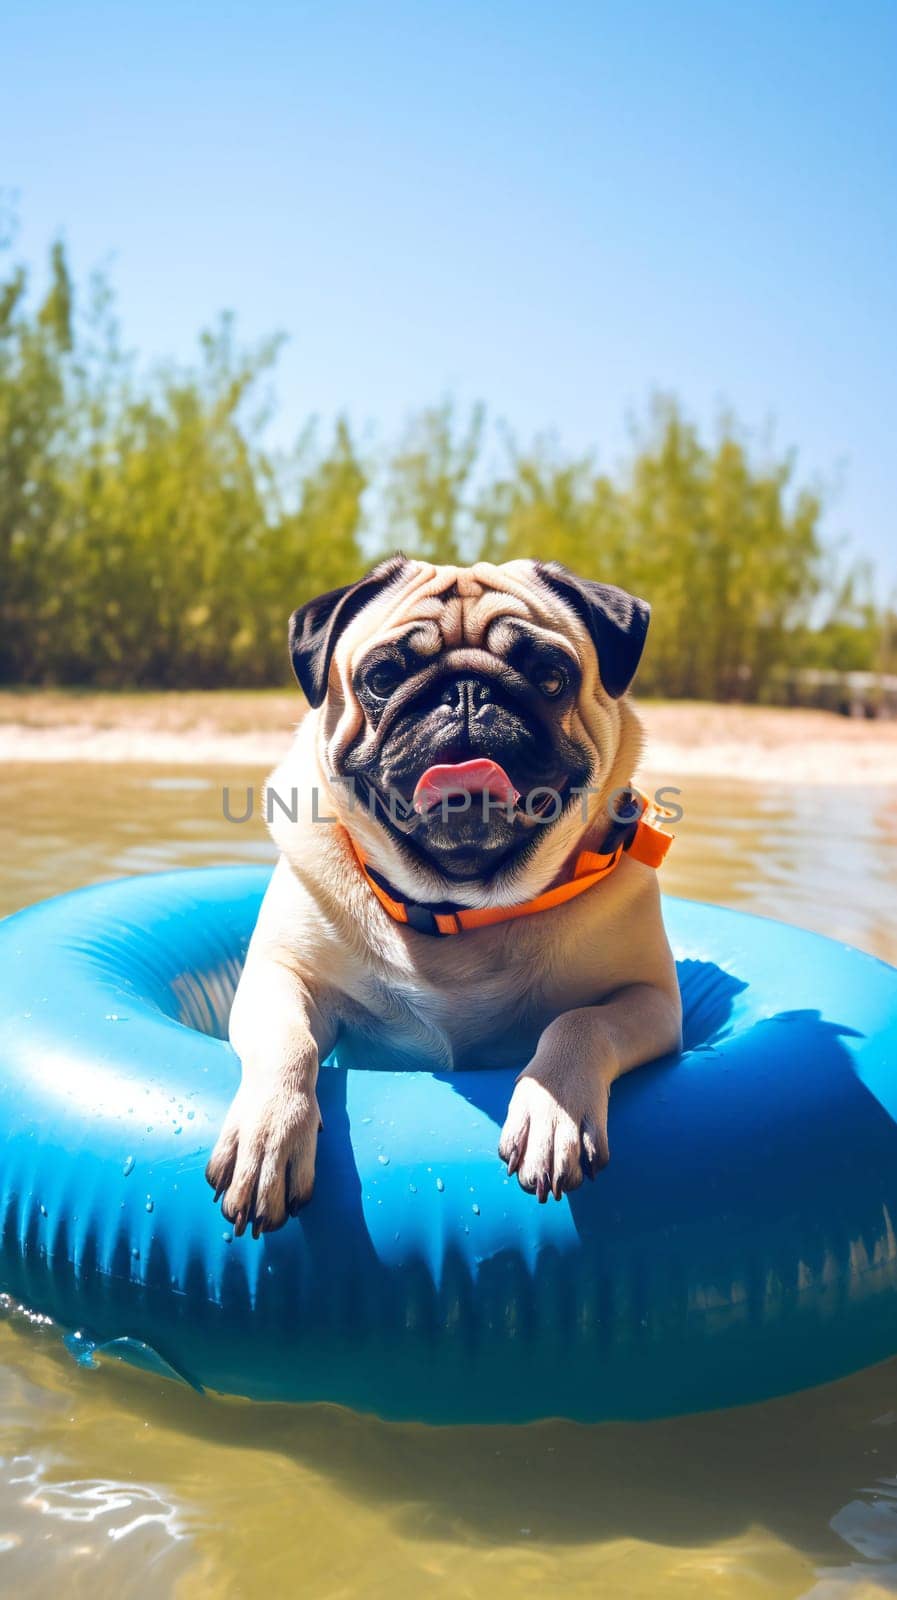 The pug dog is floating on an inflatable ring in the sea or river or pond